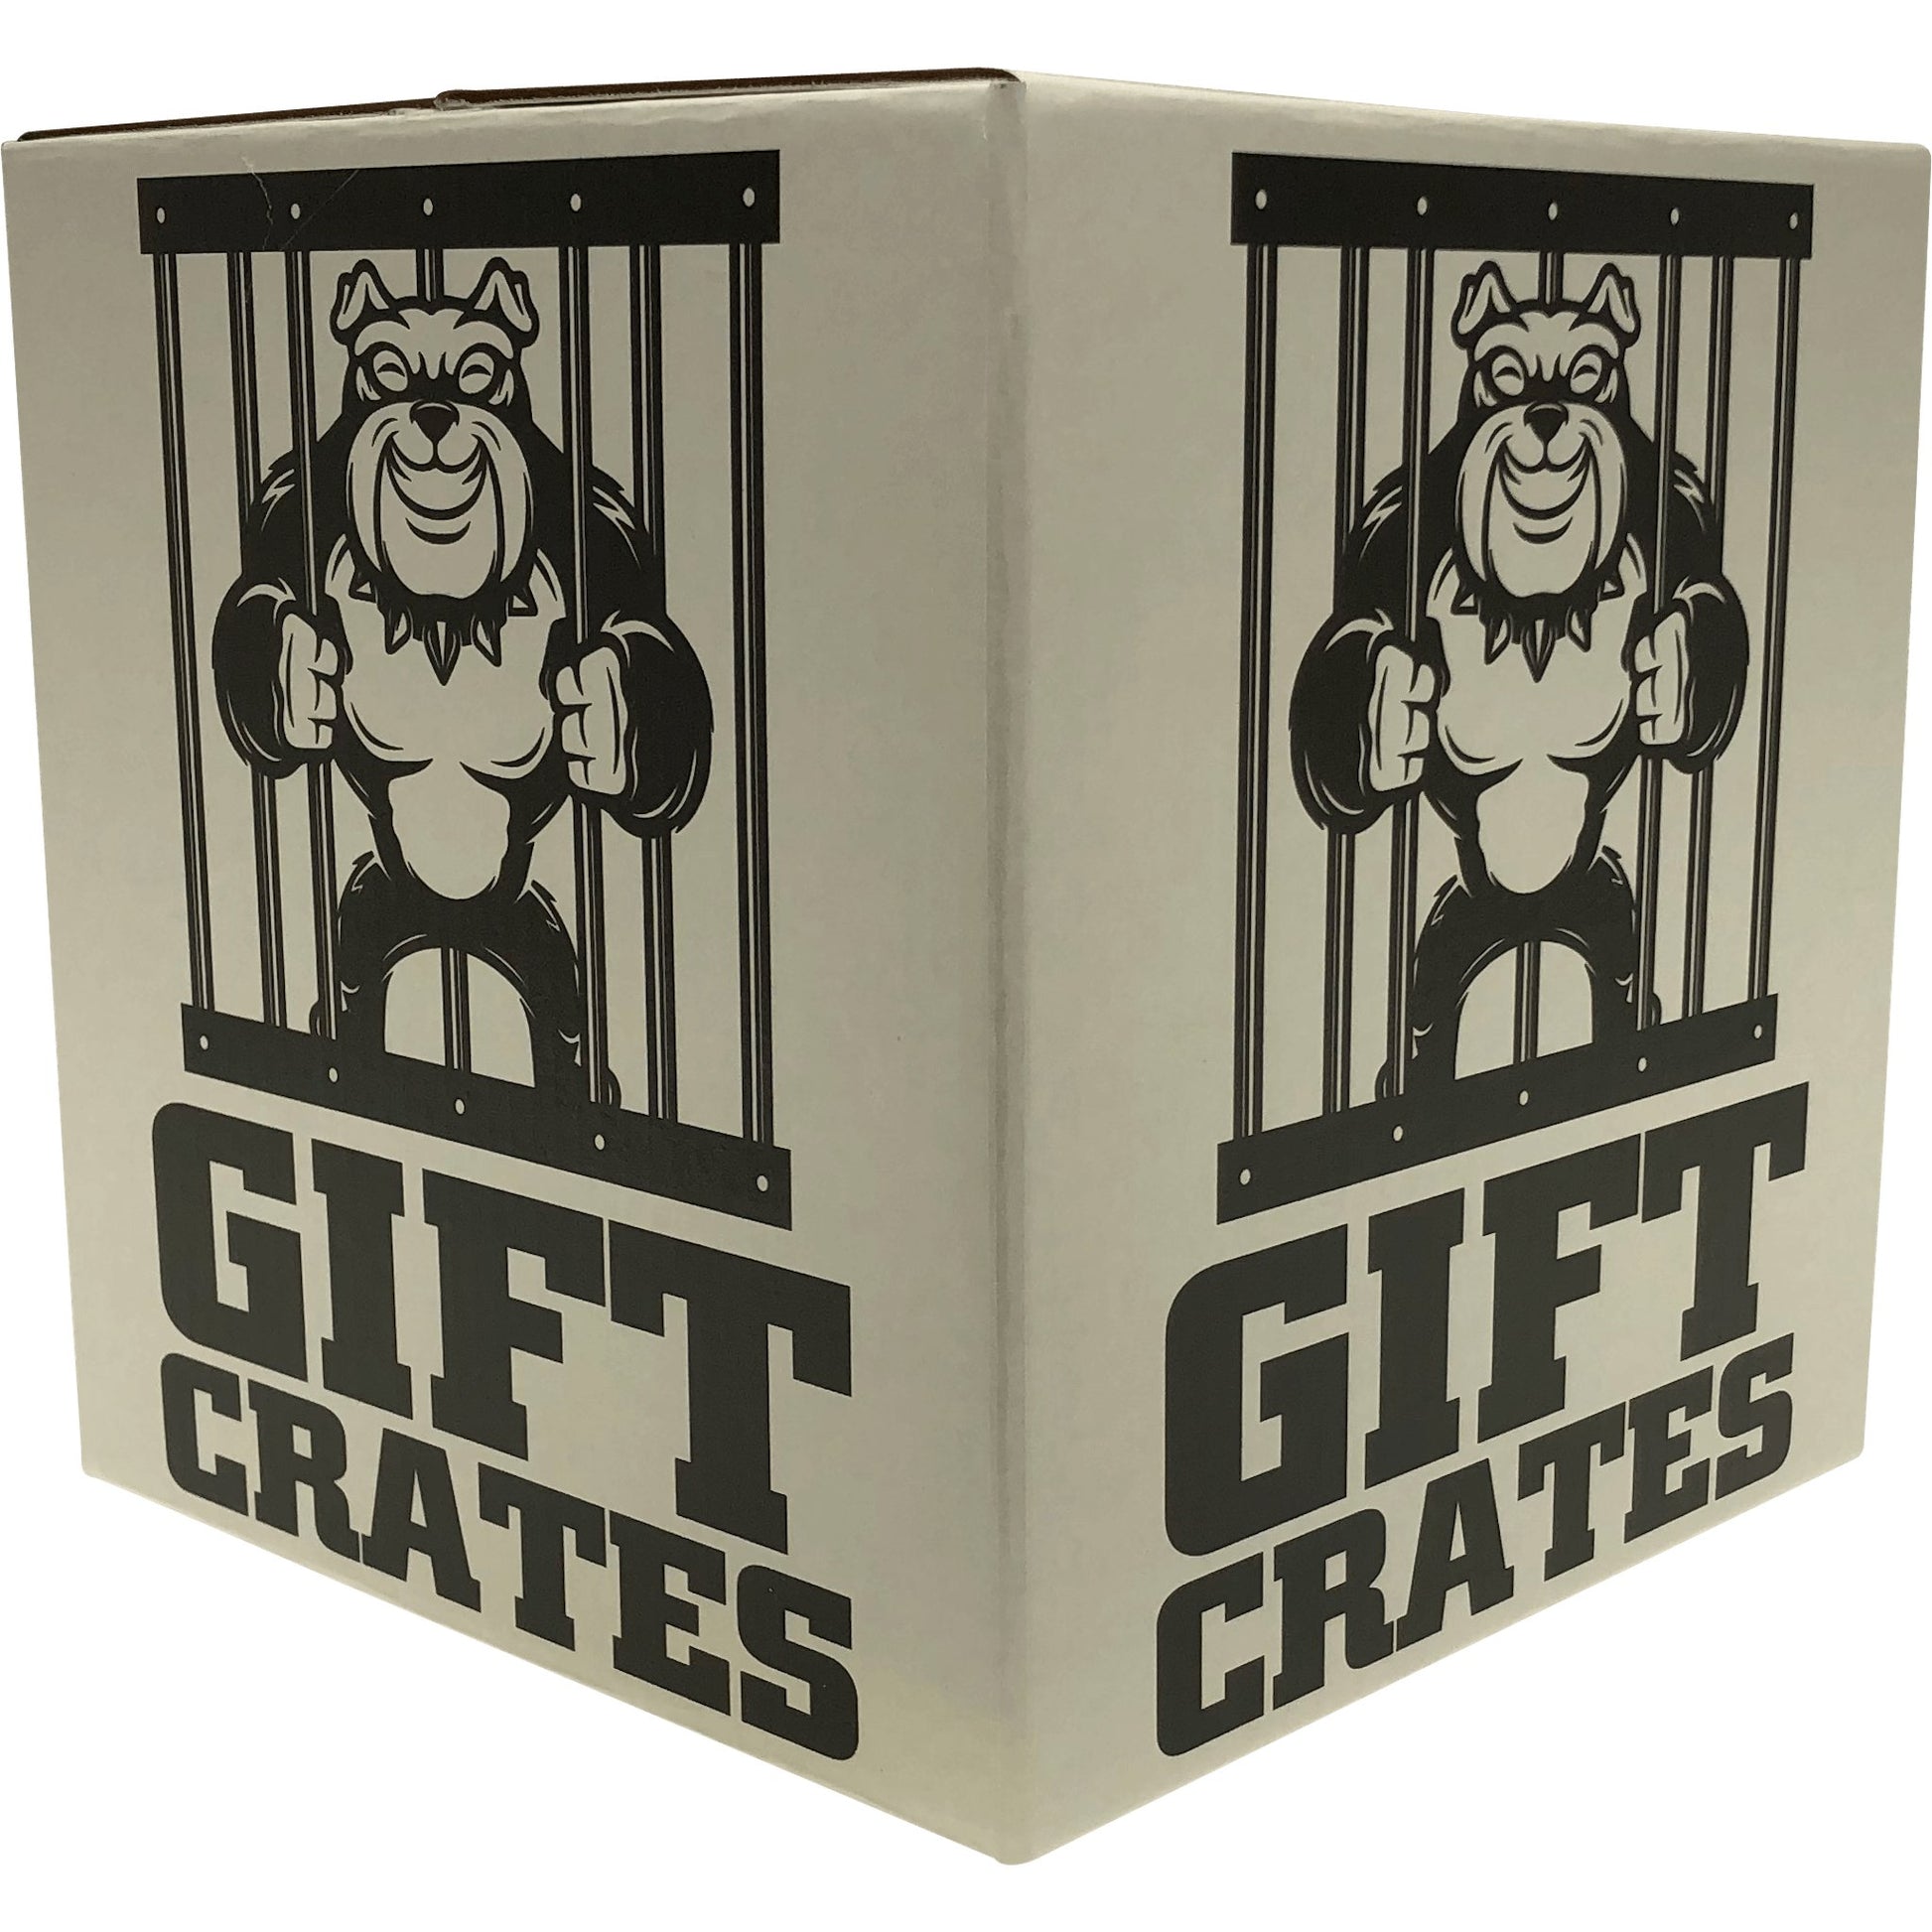 New Parents Backpack Crate - Gift Crates